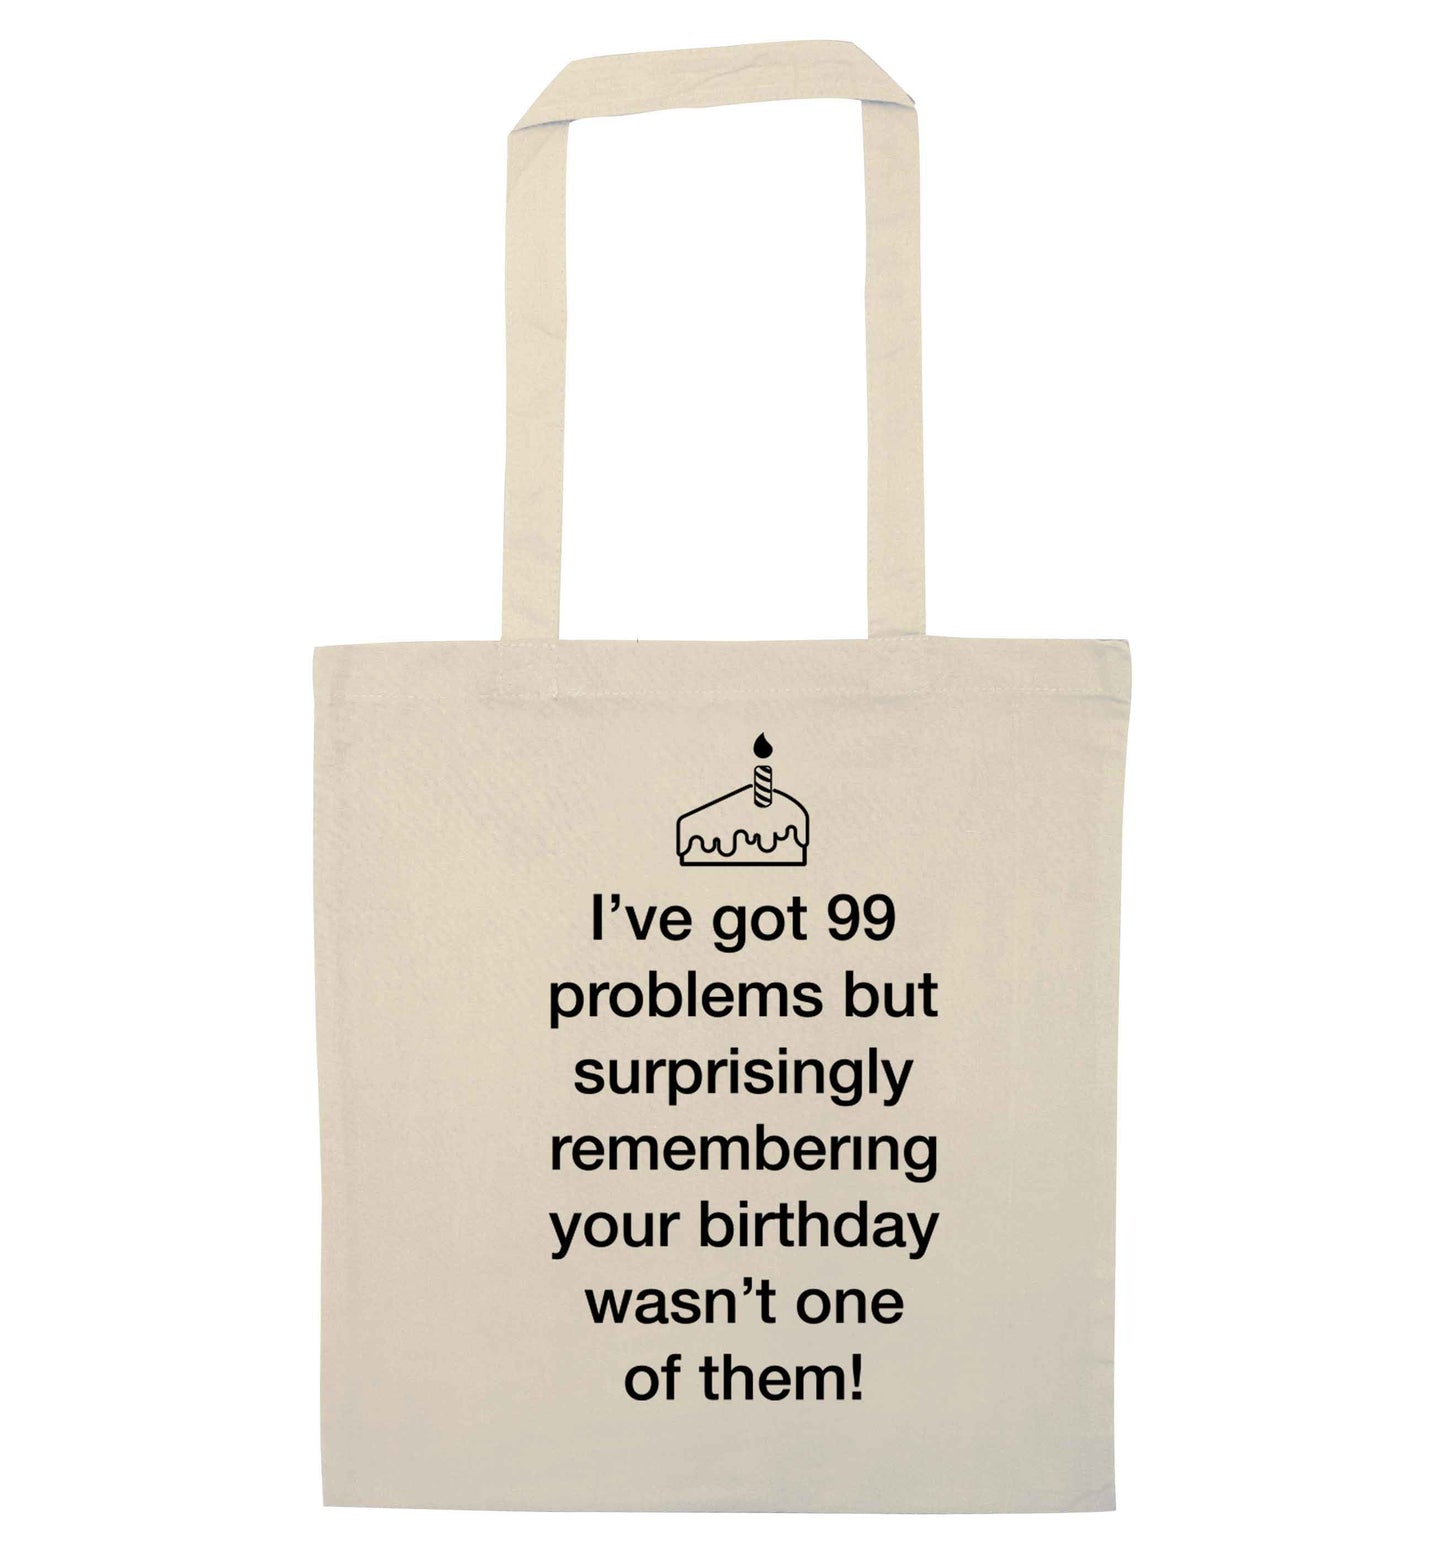 I've got 99 problems but surprisingly remembering your birthday wasn't one of them! natural tote bag